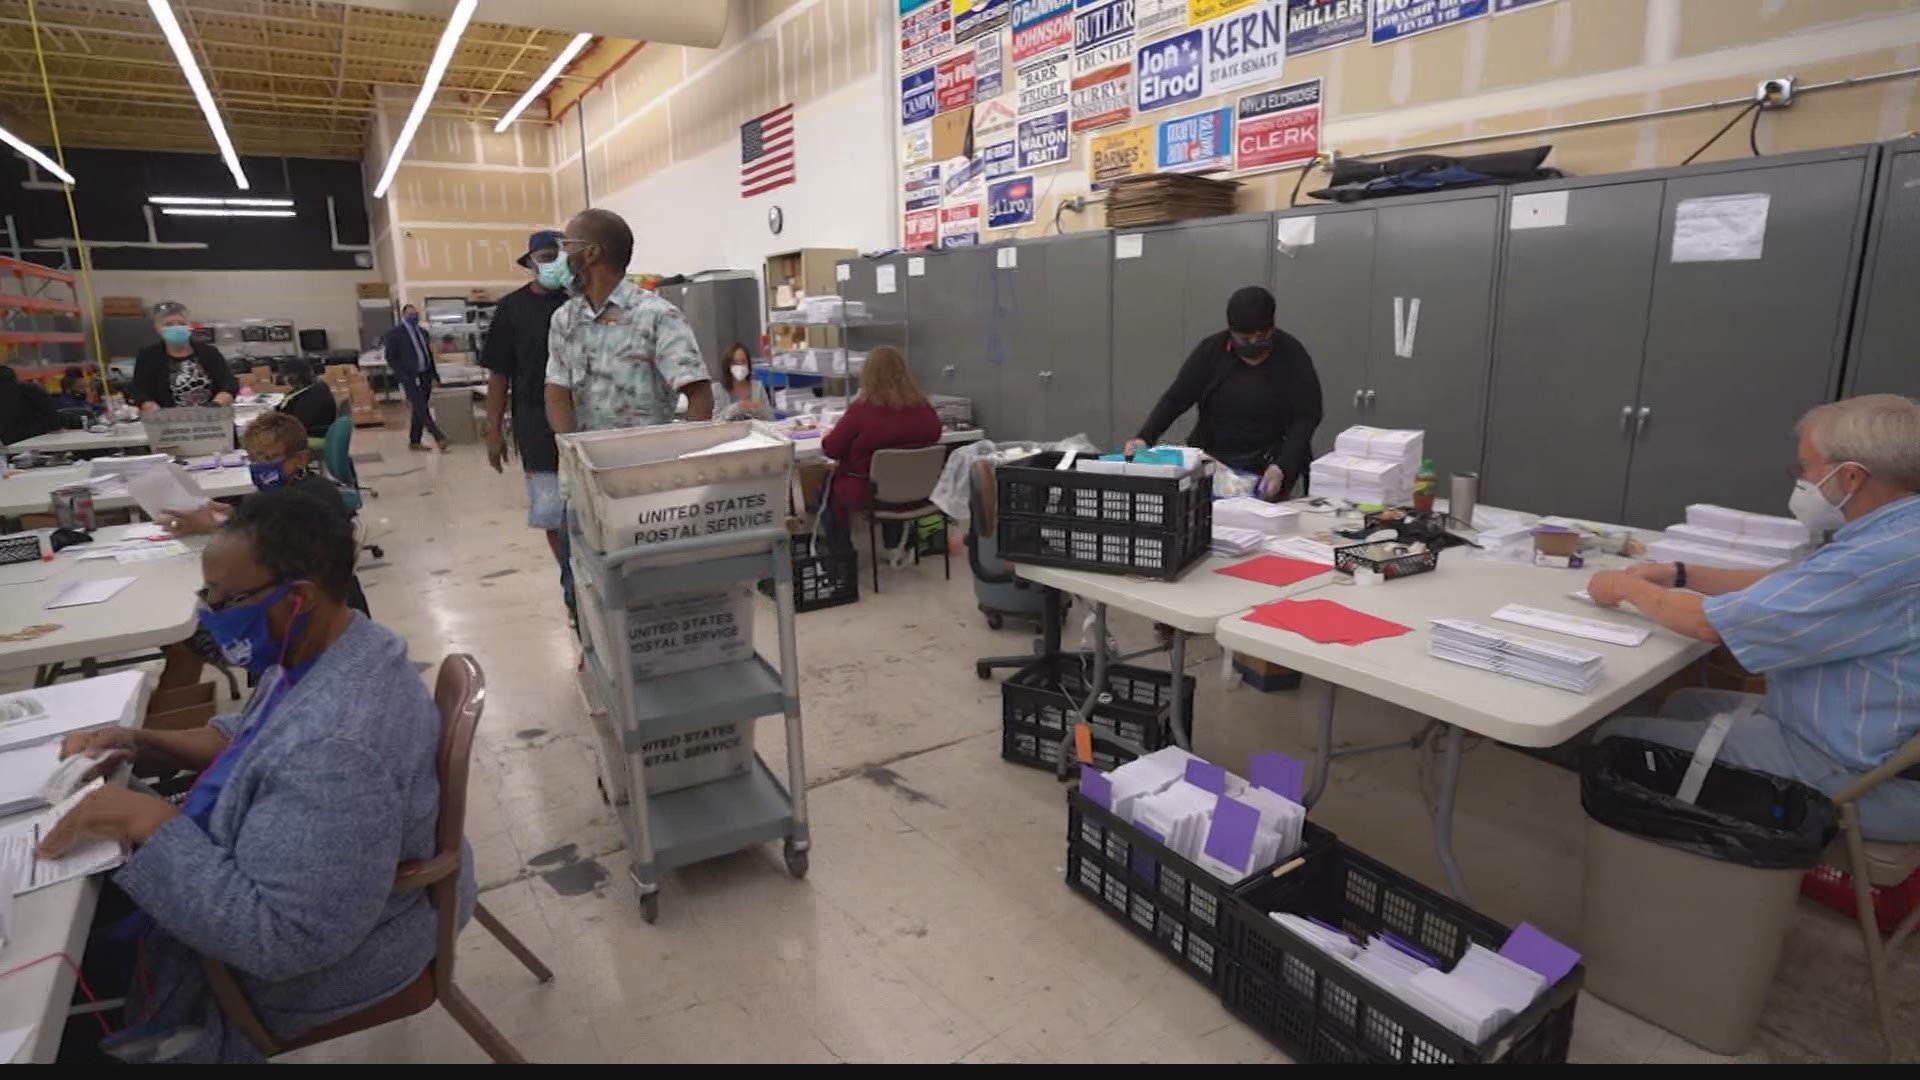 Across the state, thousands of absentee ballots are going in the mail this week.